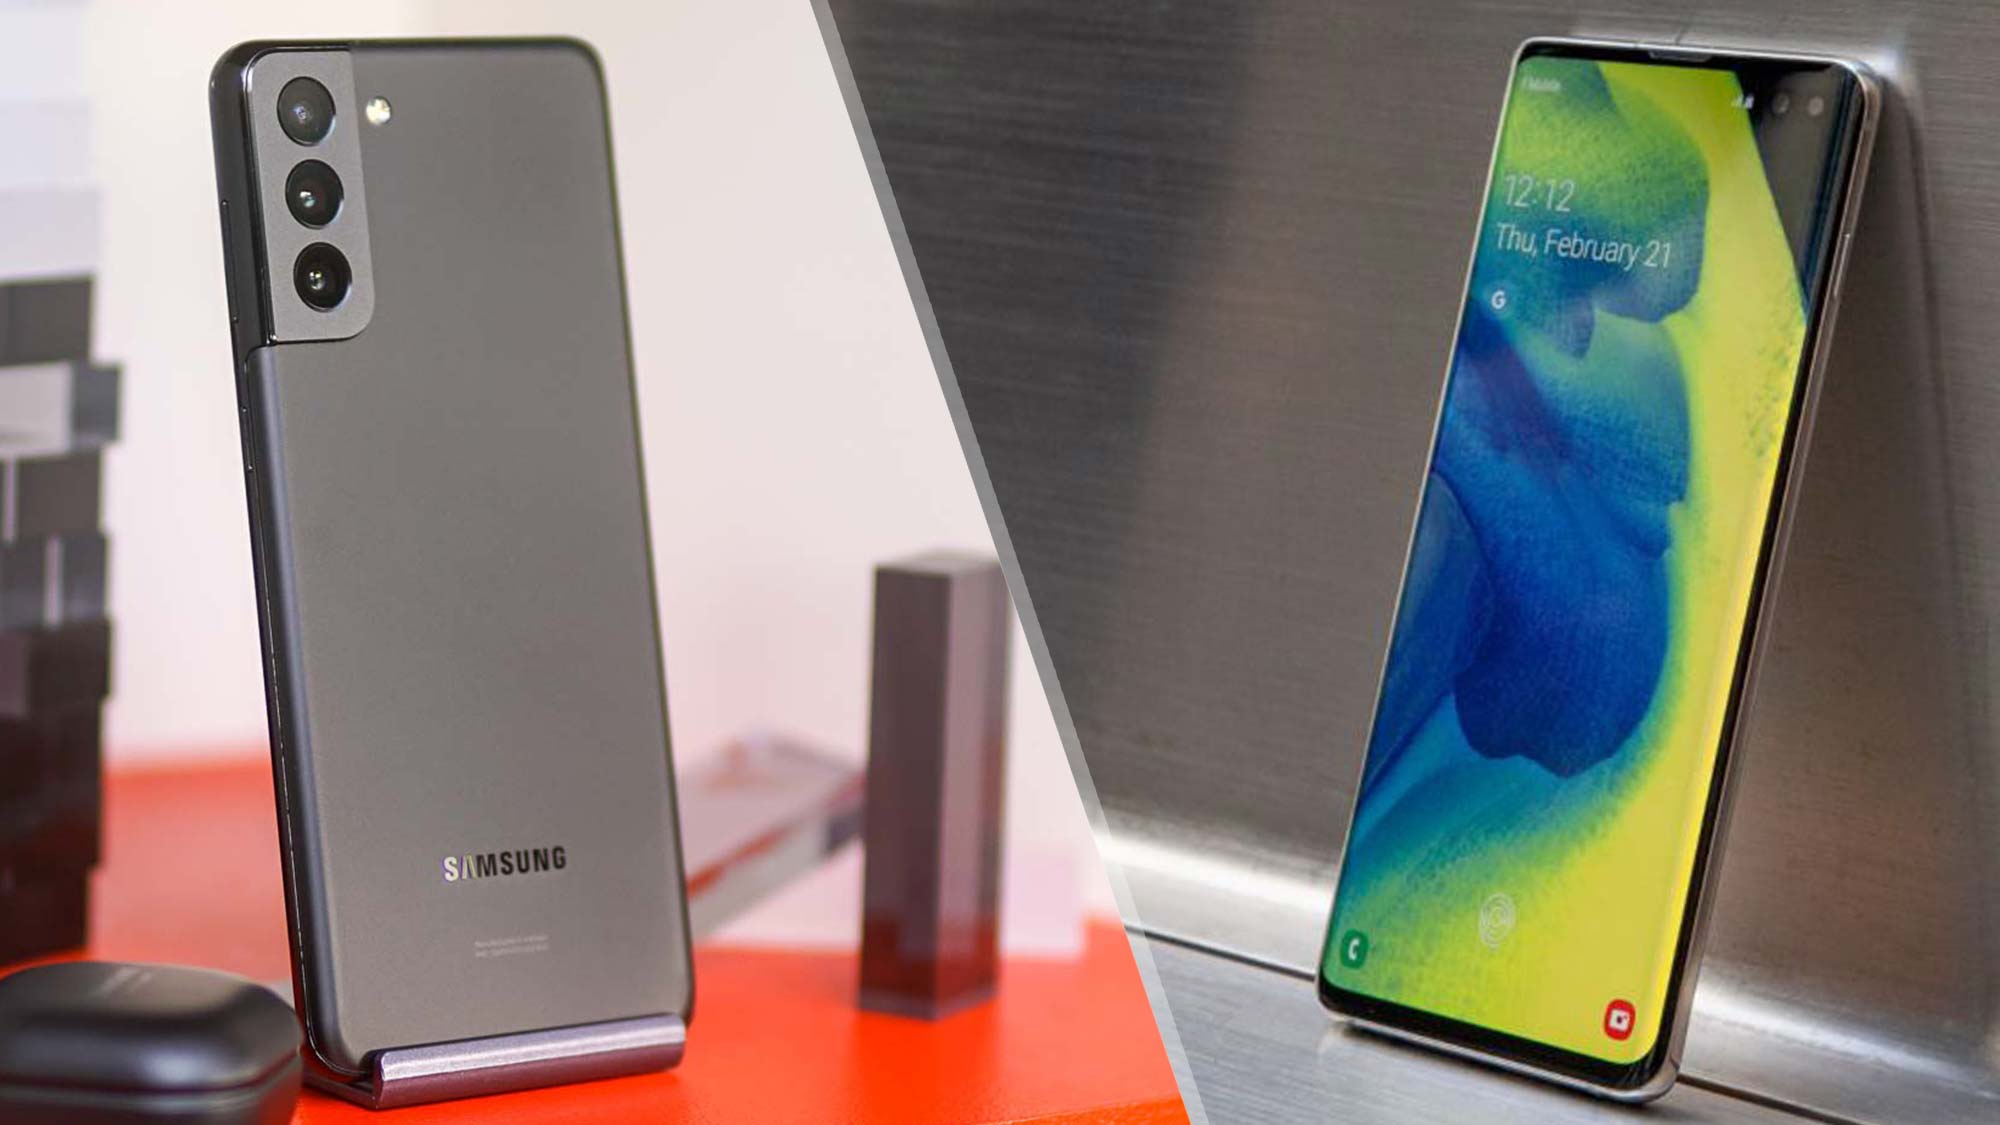 Samsung Galaxy S10 5G won't be coming to Canada